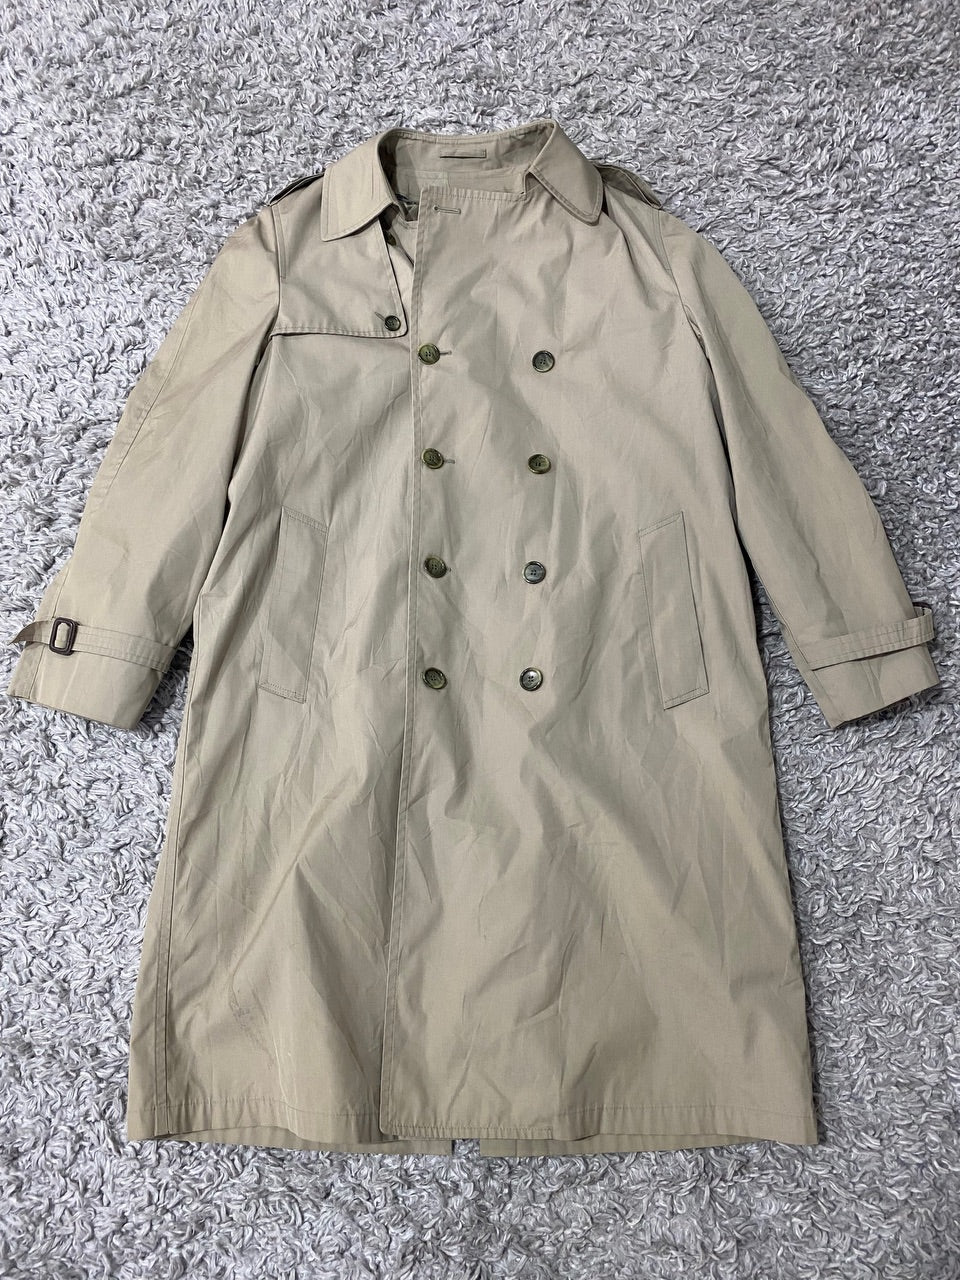 London Fog Trench Coat -10 pieces